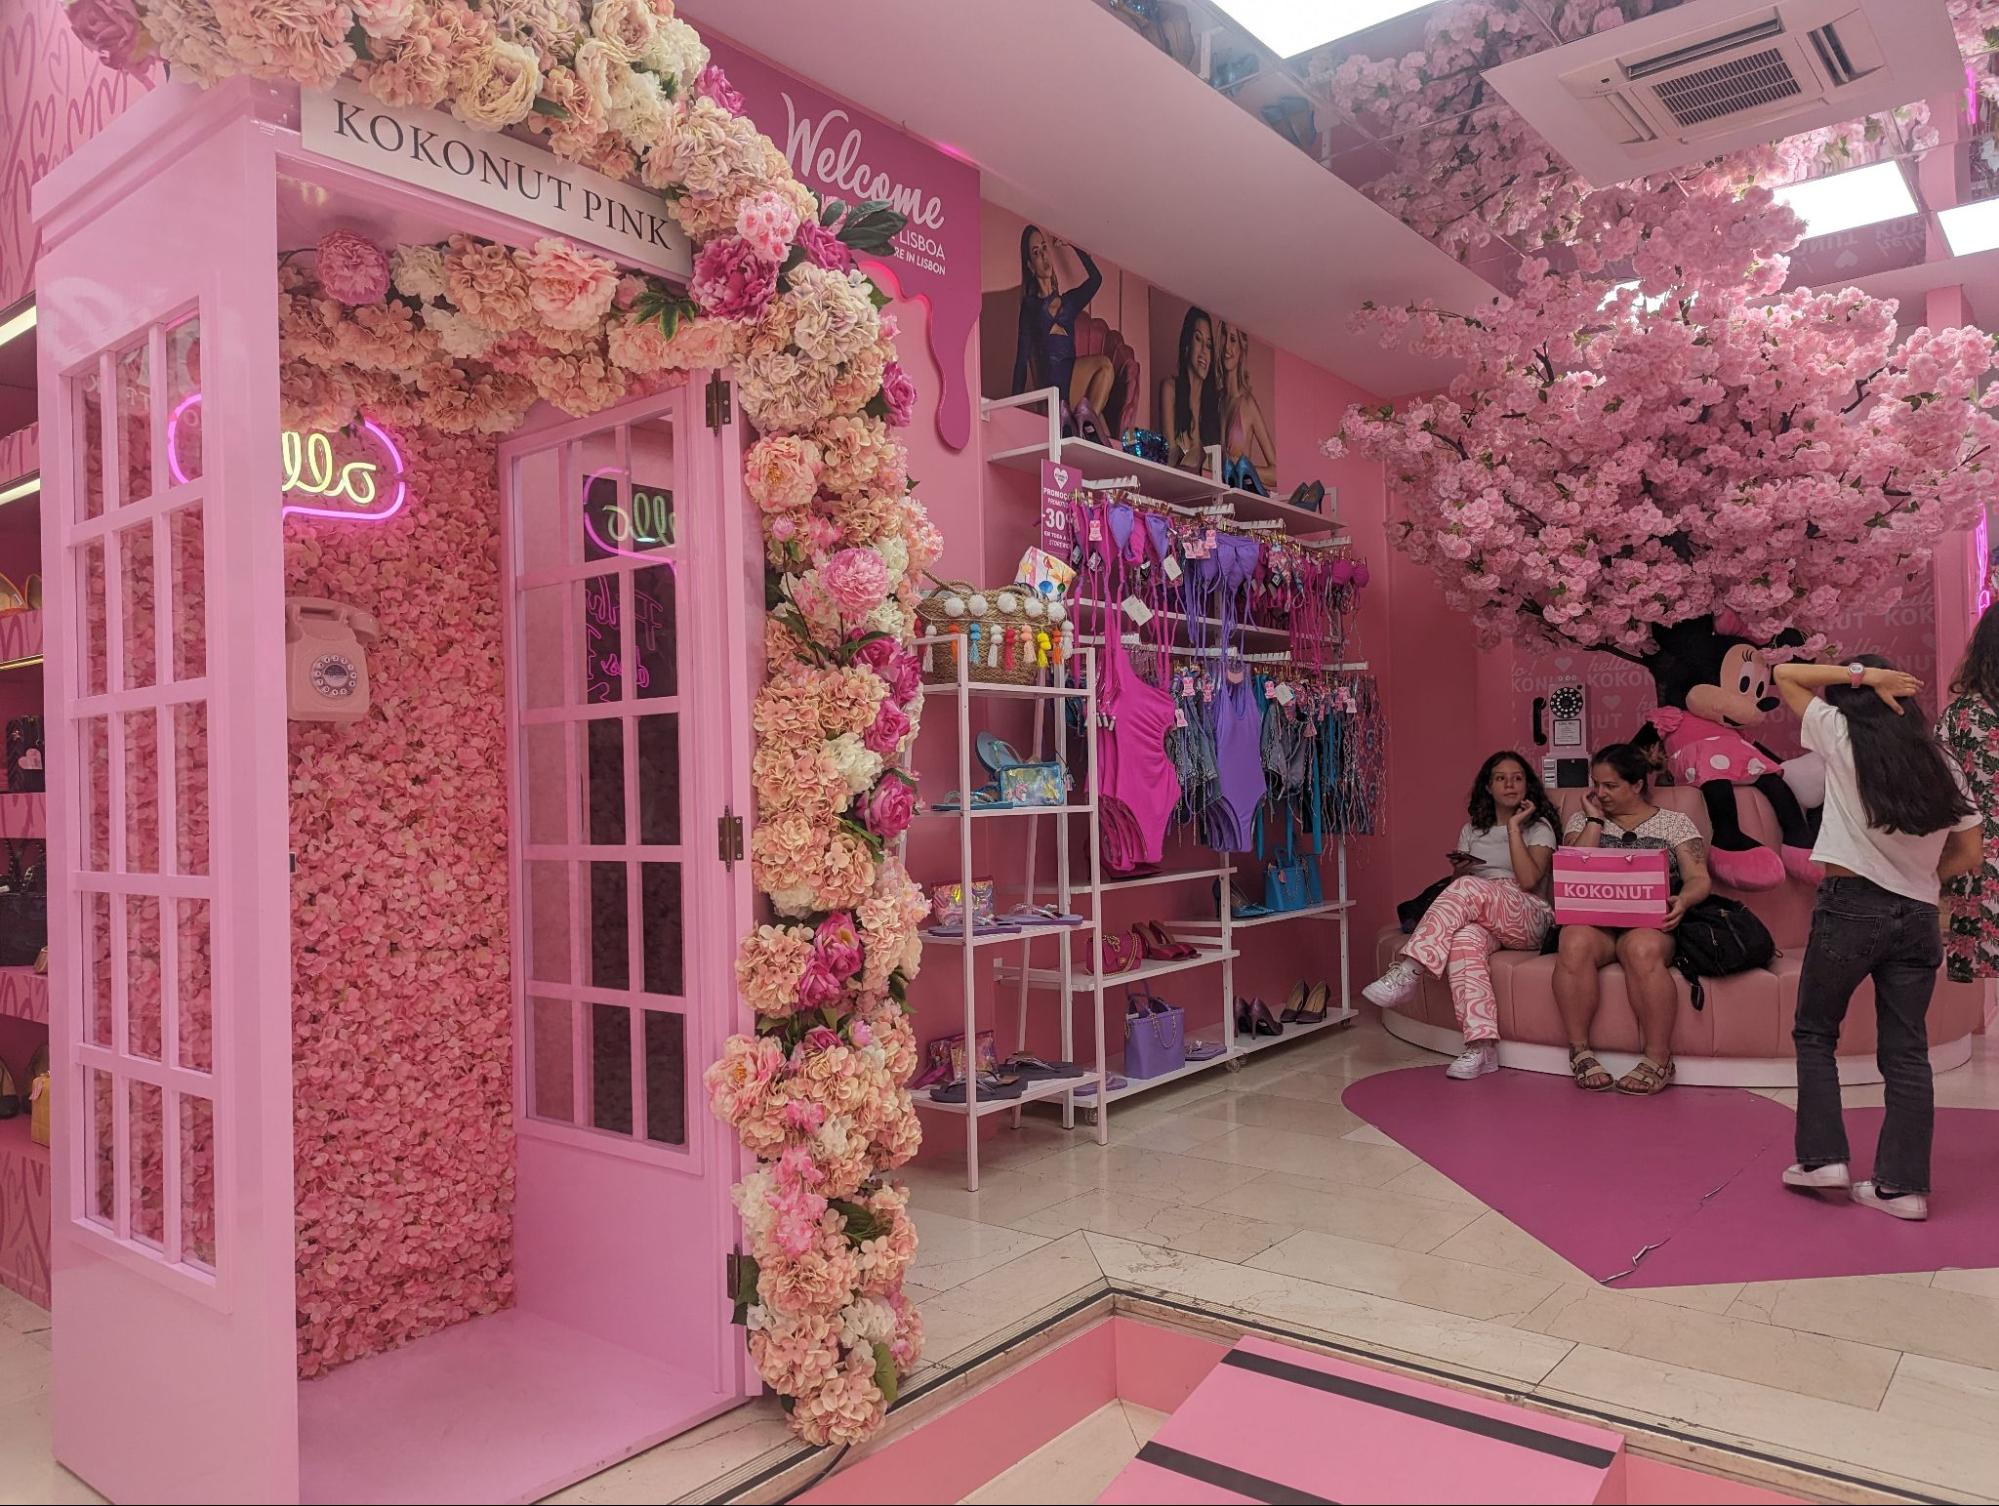 Photo of Kokonut Pink store entrance with pink phone booth and walls